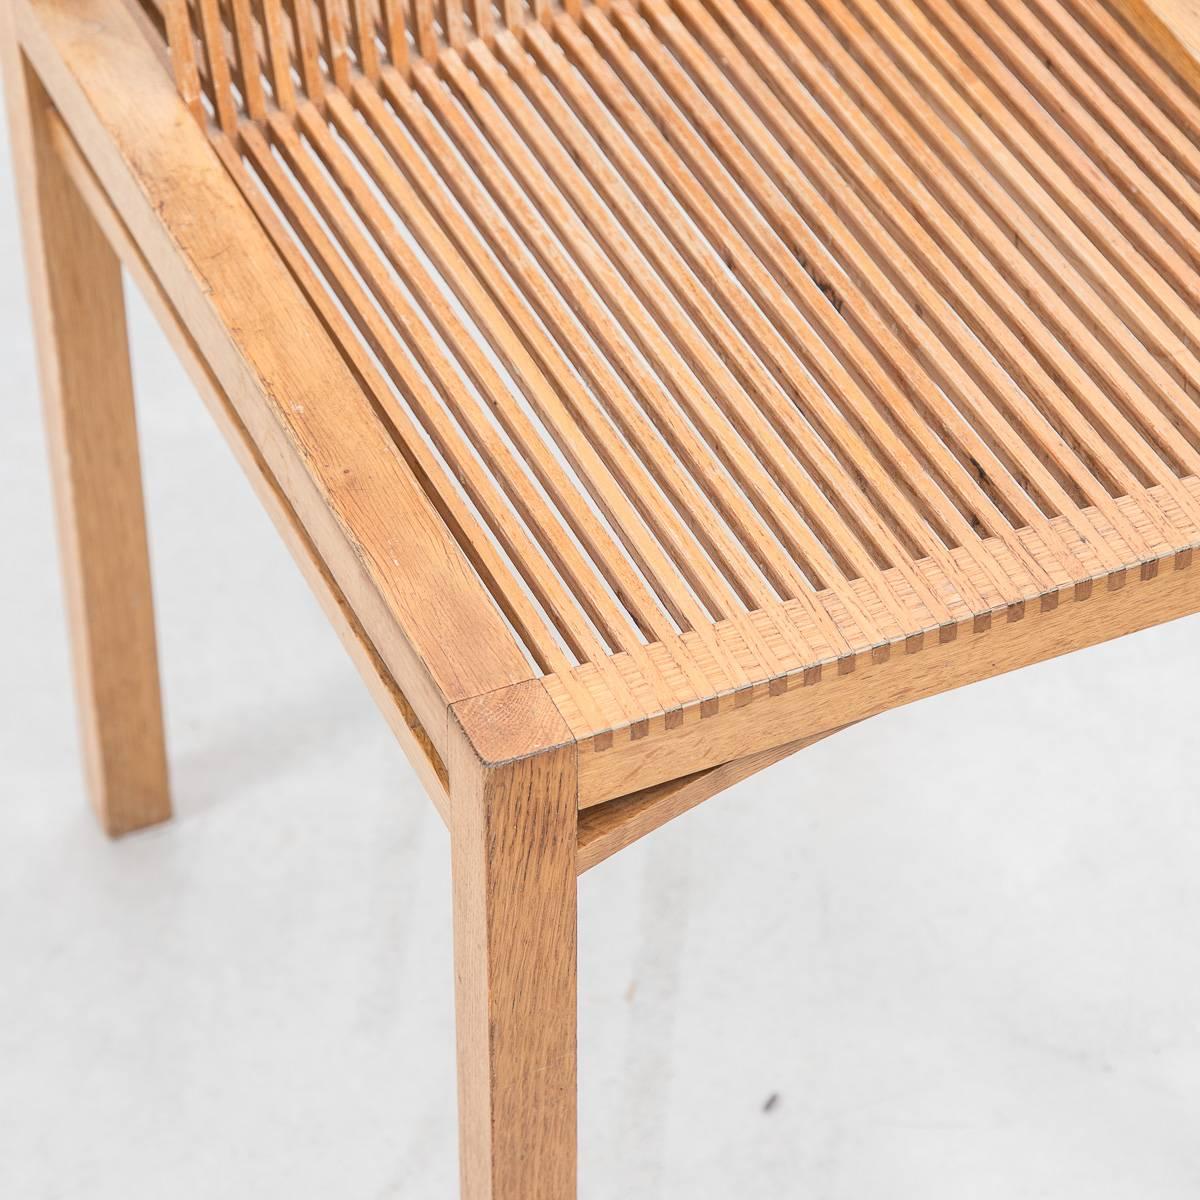 Joinery Ruud Jan Kokke Latjes Chairs, Netherlands 1984